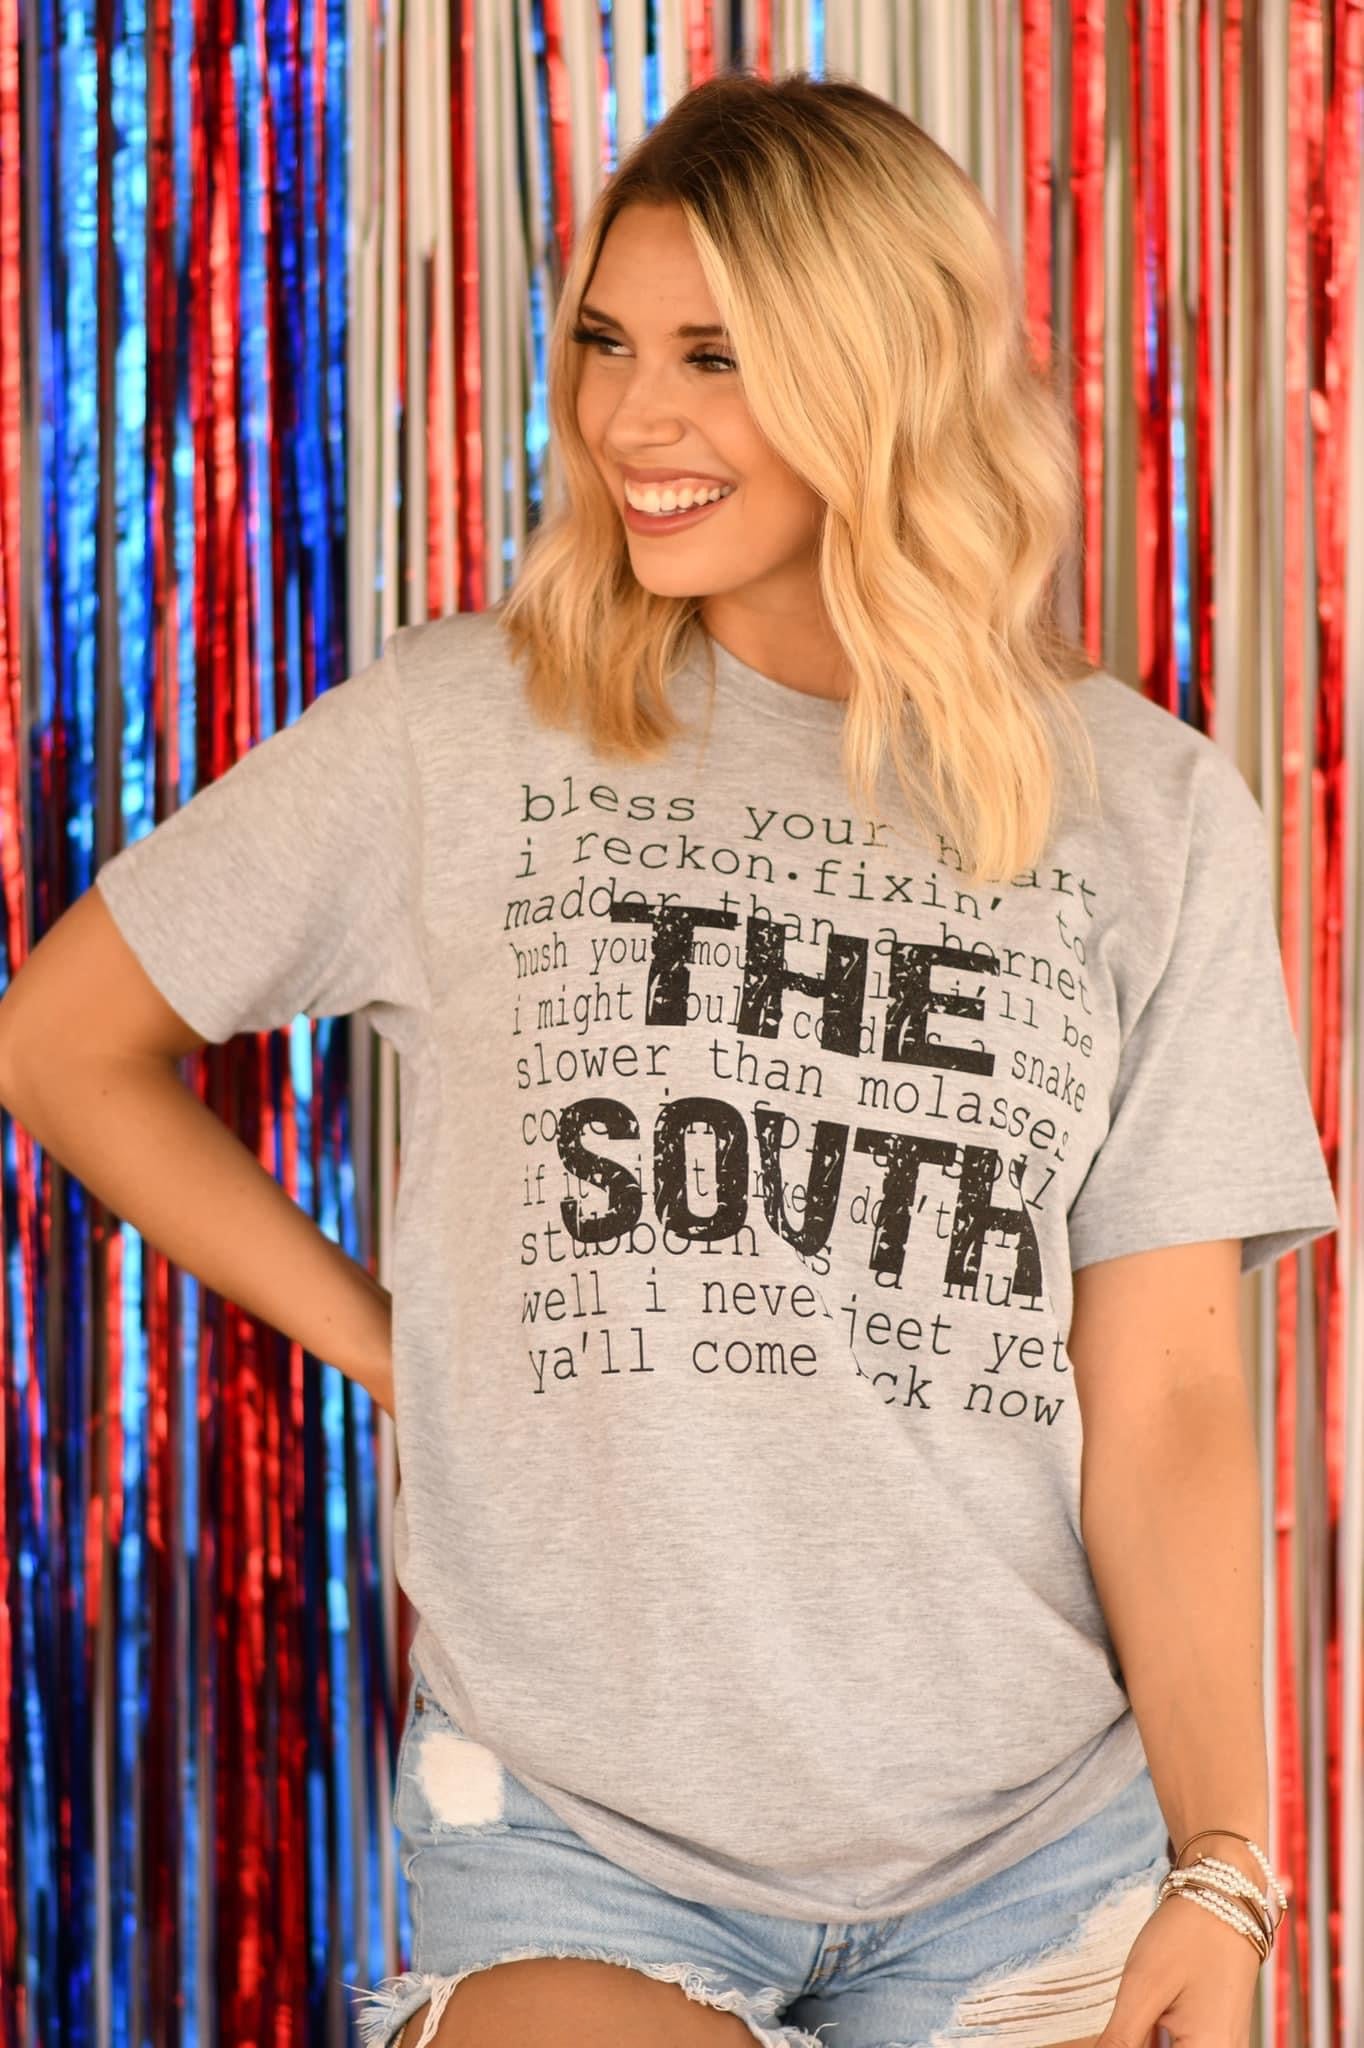 The South Graphic Tee